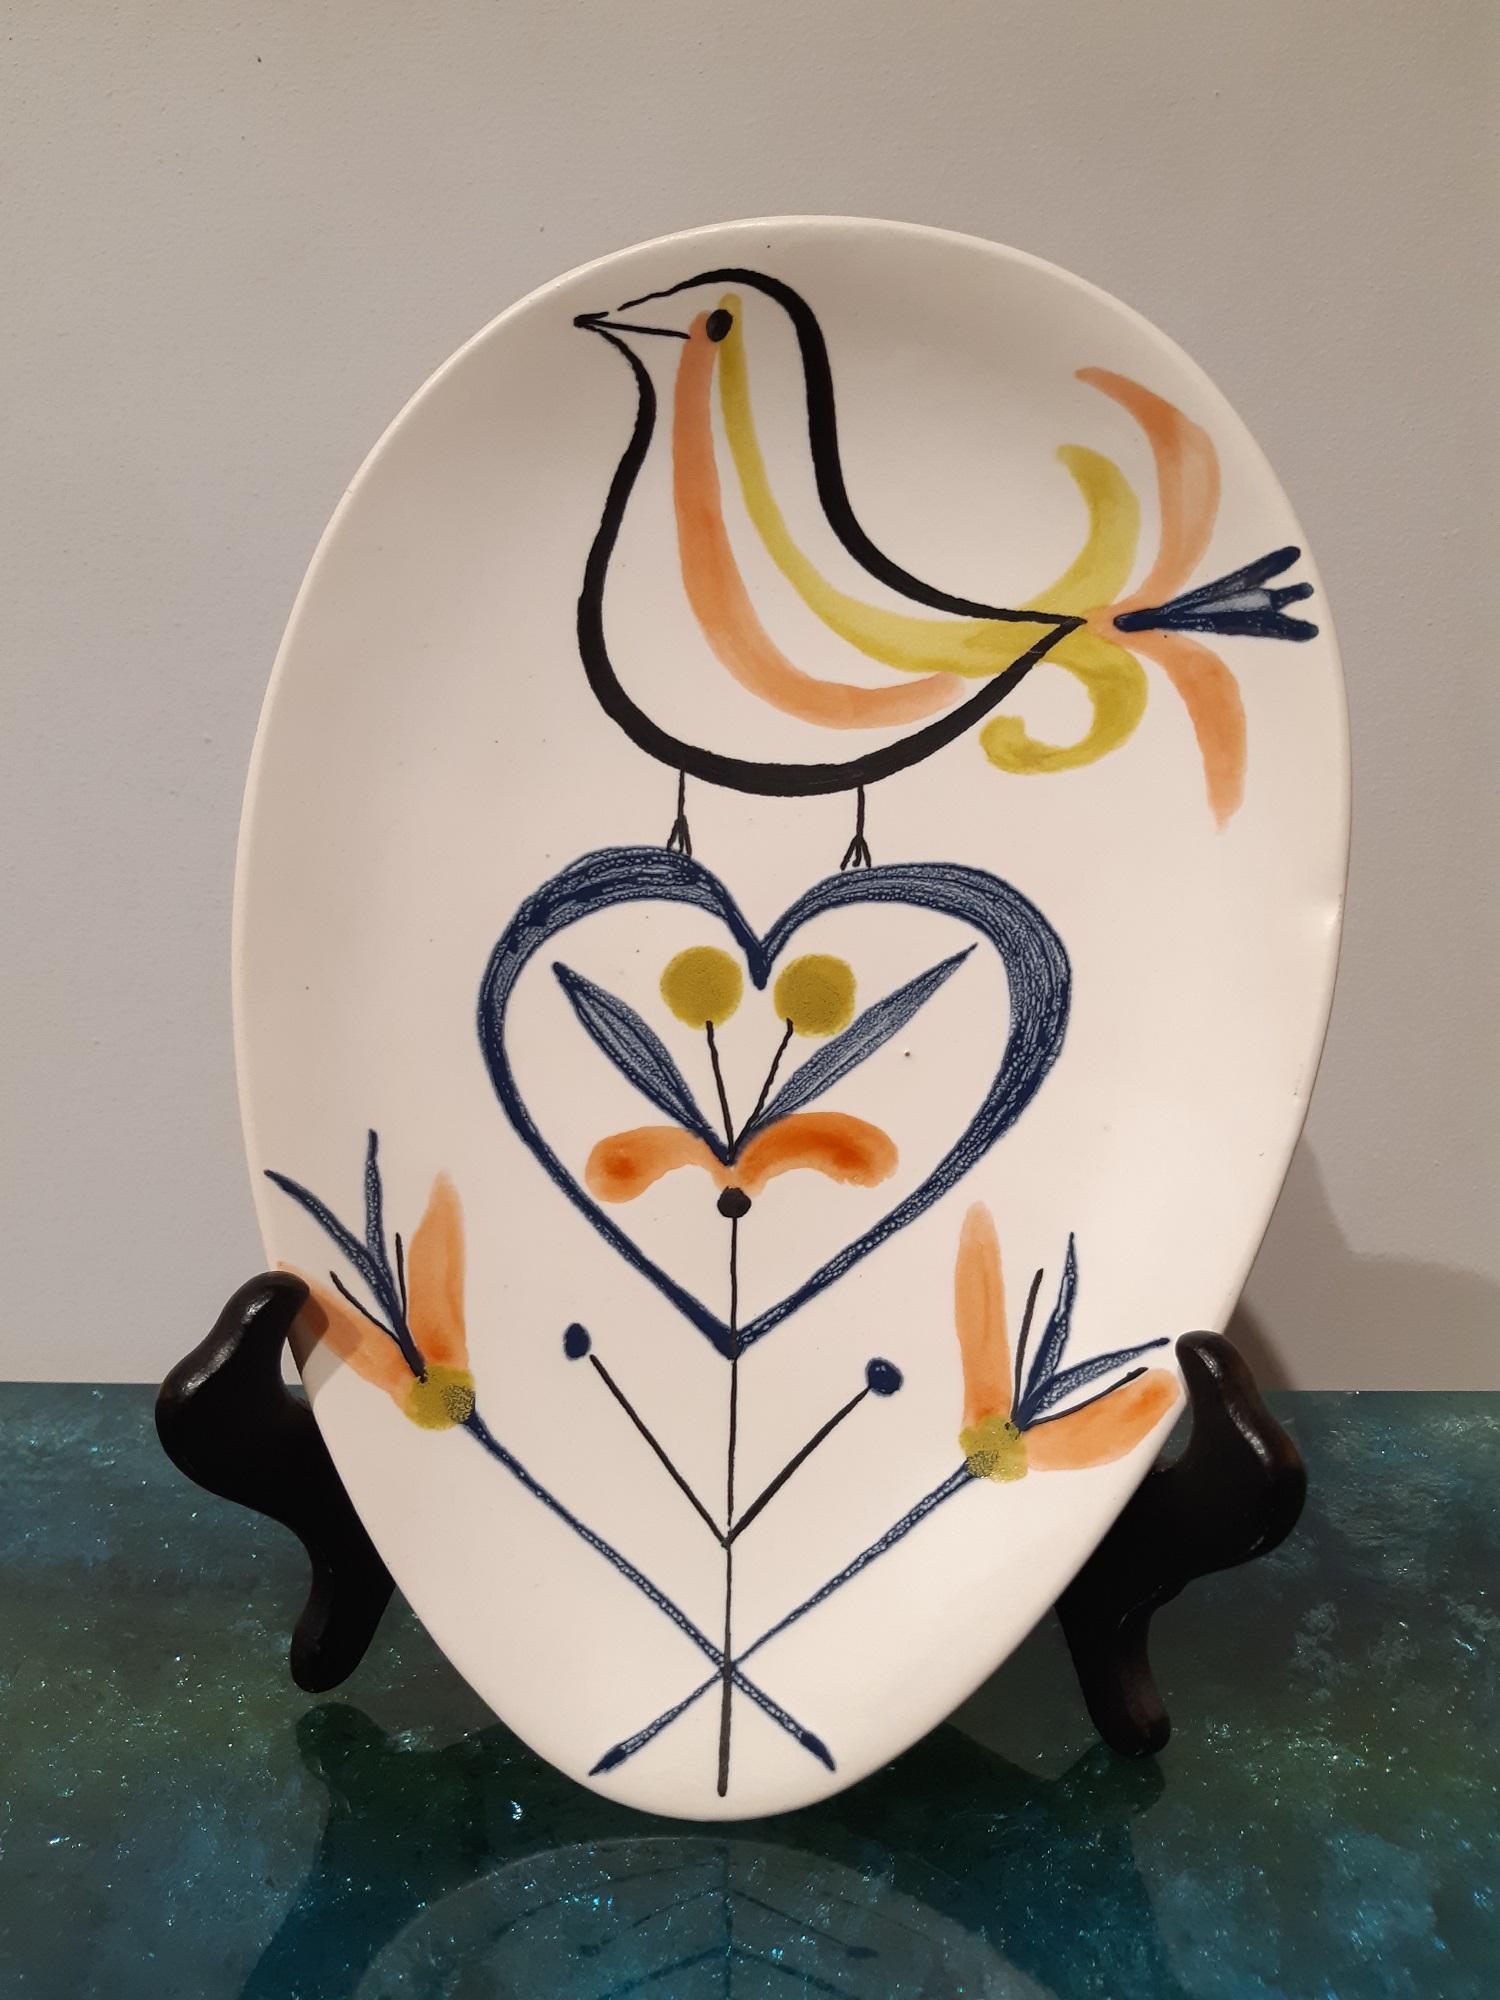 Pair of Roger Capron French ceramics Vallauris, 1960.

2 ceramics with birds decor made by the artist Roger Capron in Vallauris, France during the 1960s.

One dish and one 